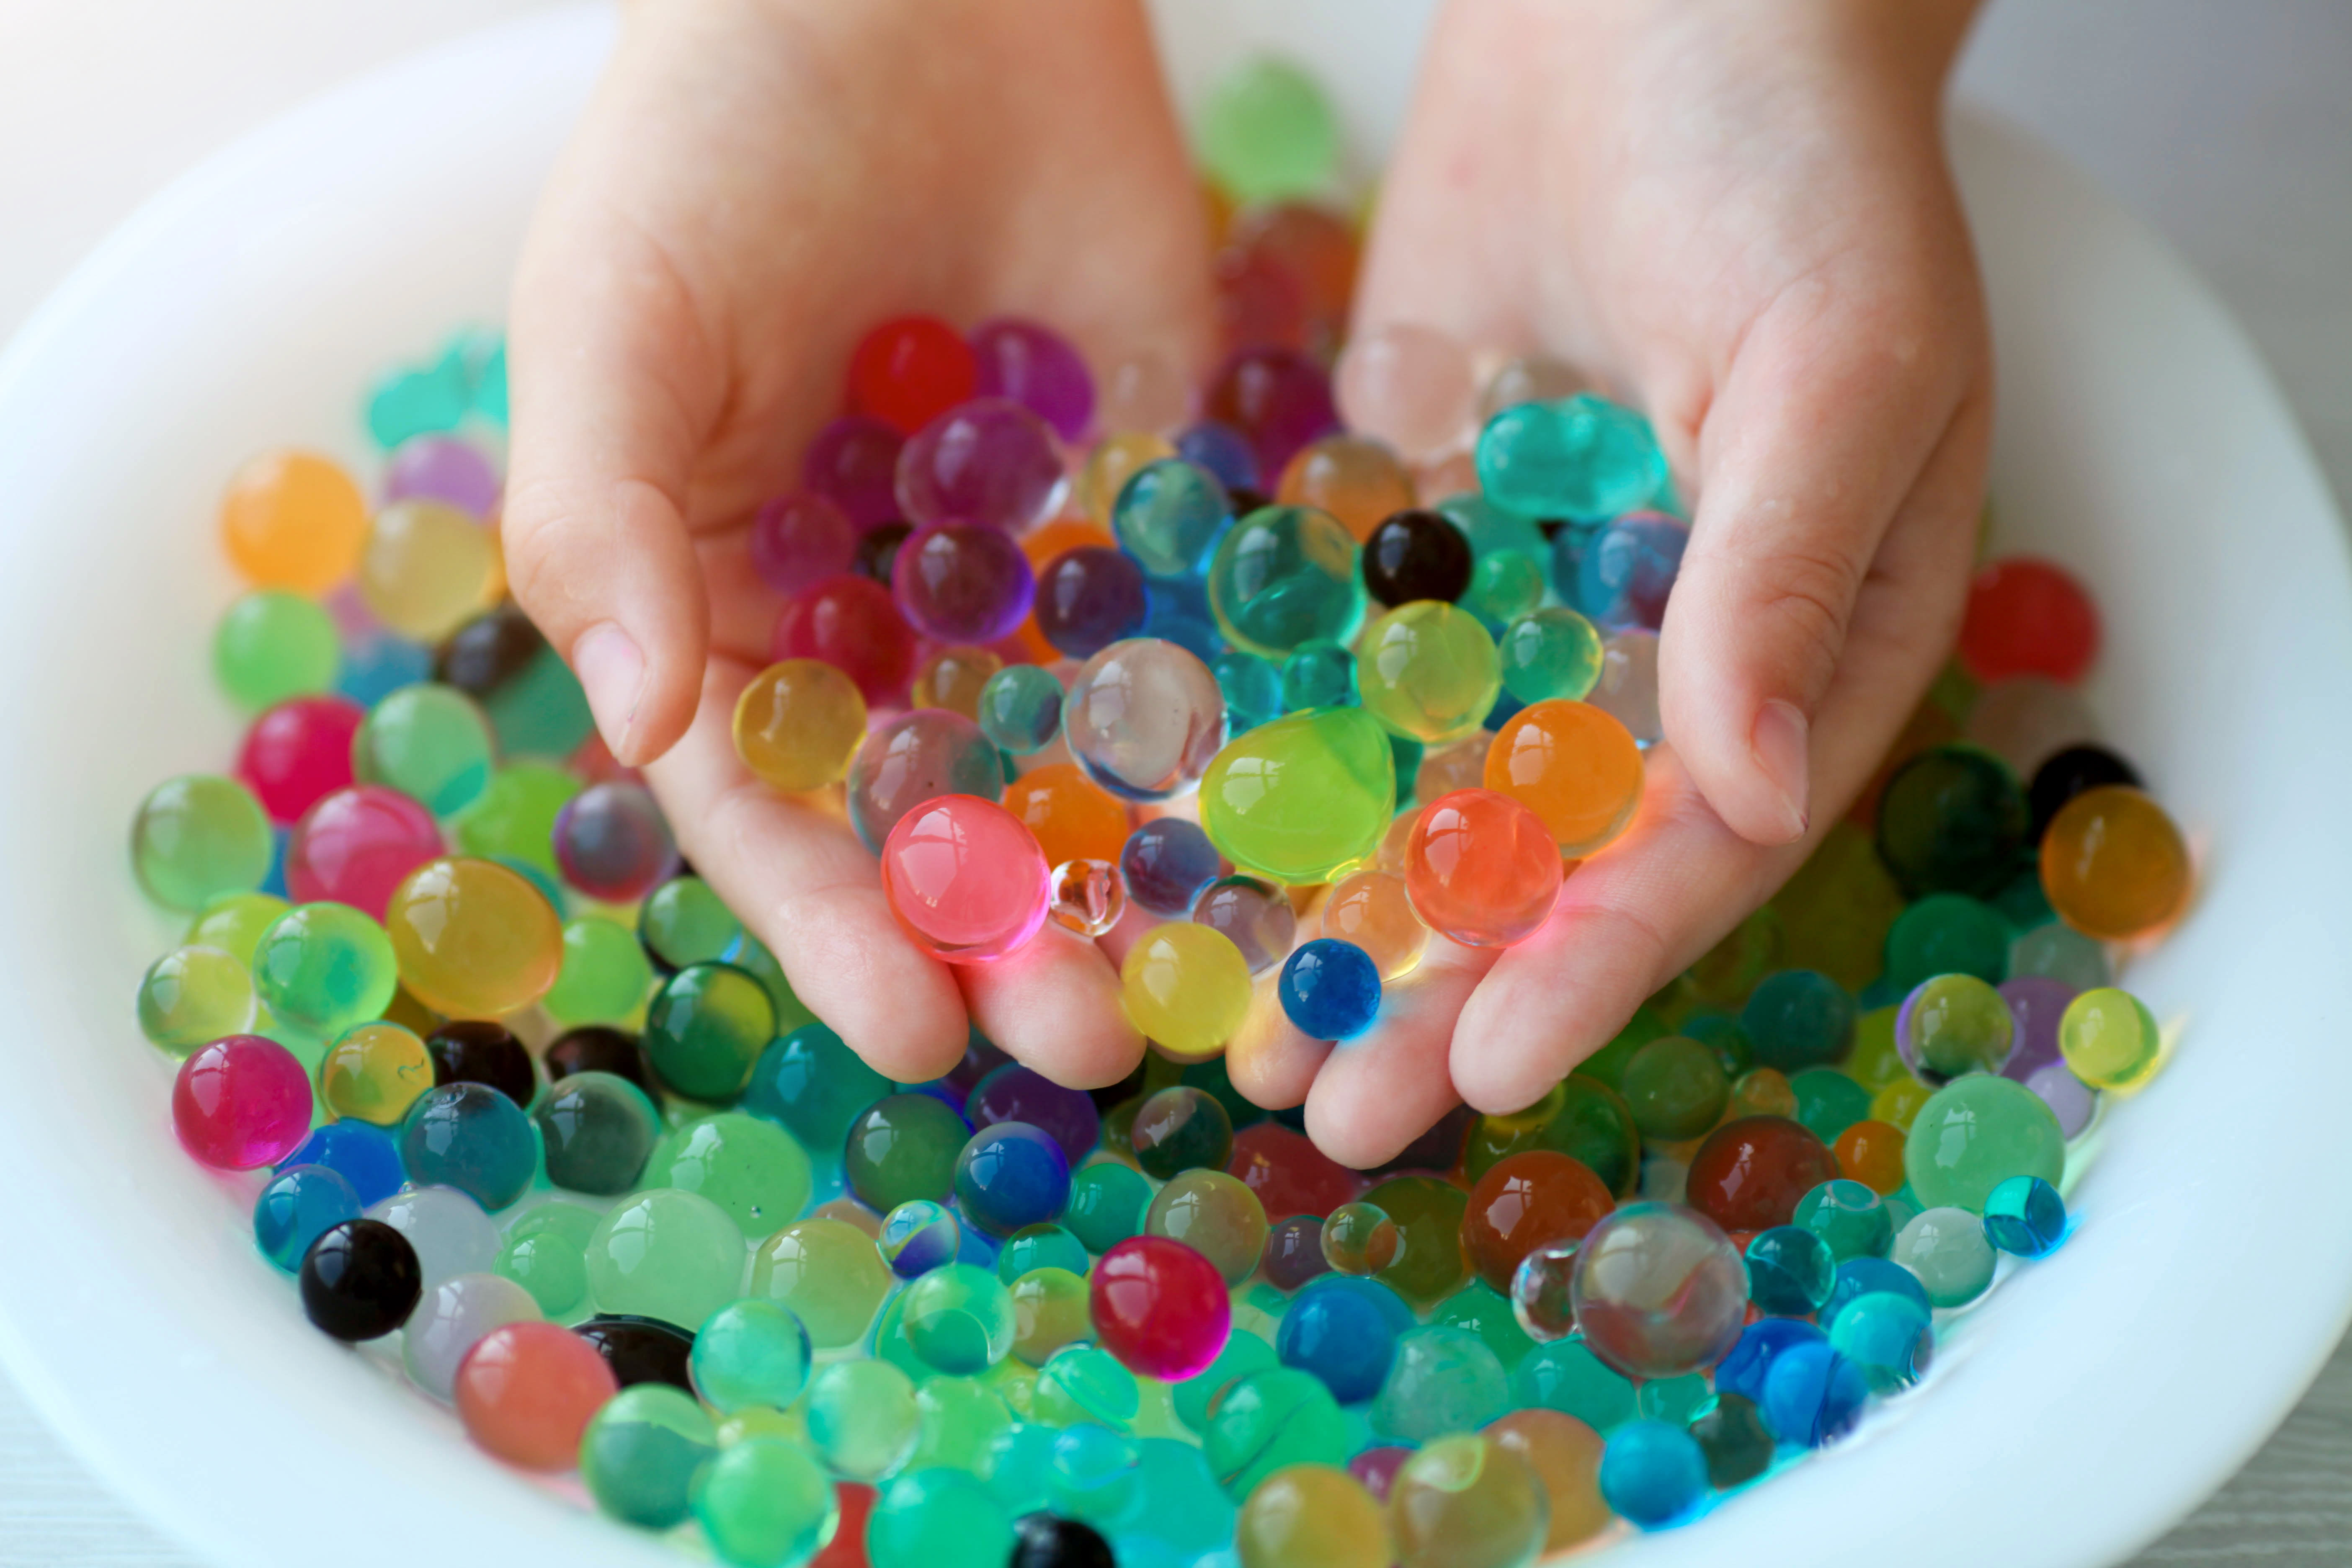 New bill seeks to ban deadly water beads toys